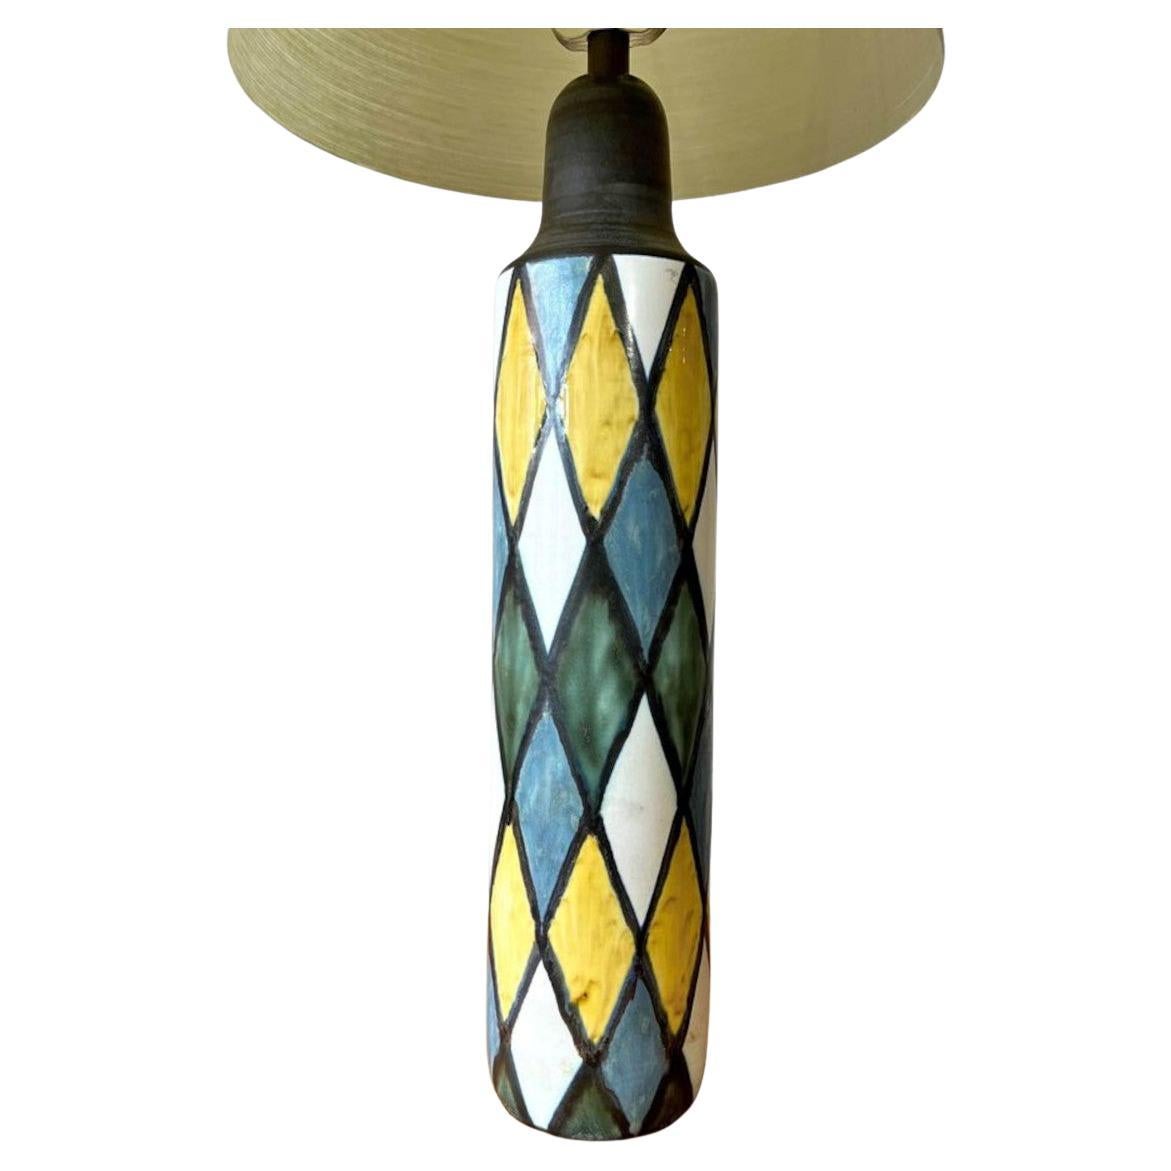 1960’s Ceramic Hand Painted Table Lamp by Lotte & Gunnar Bostland For Sale